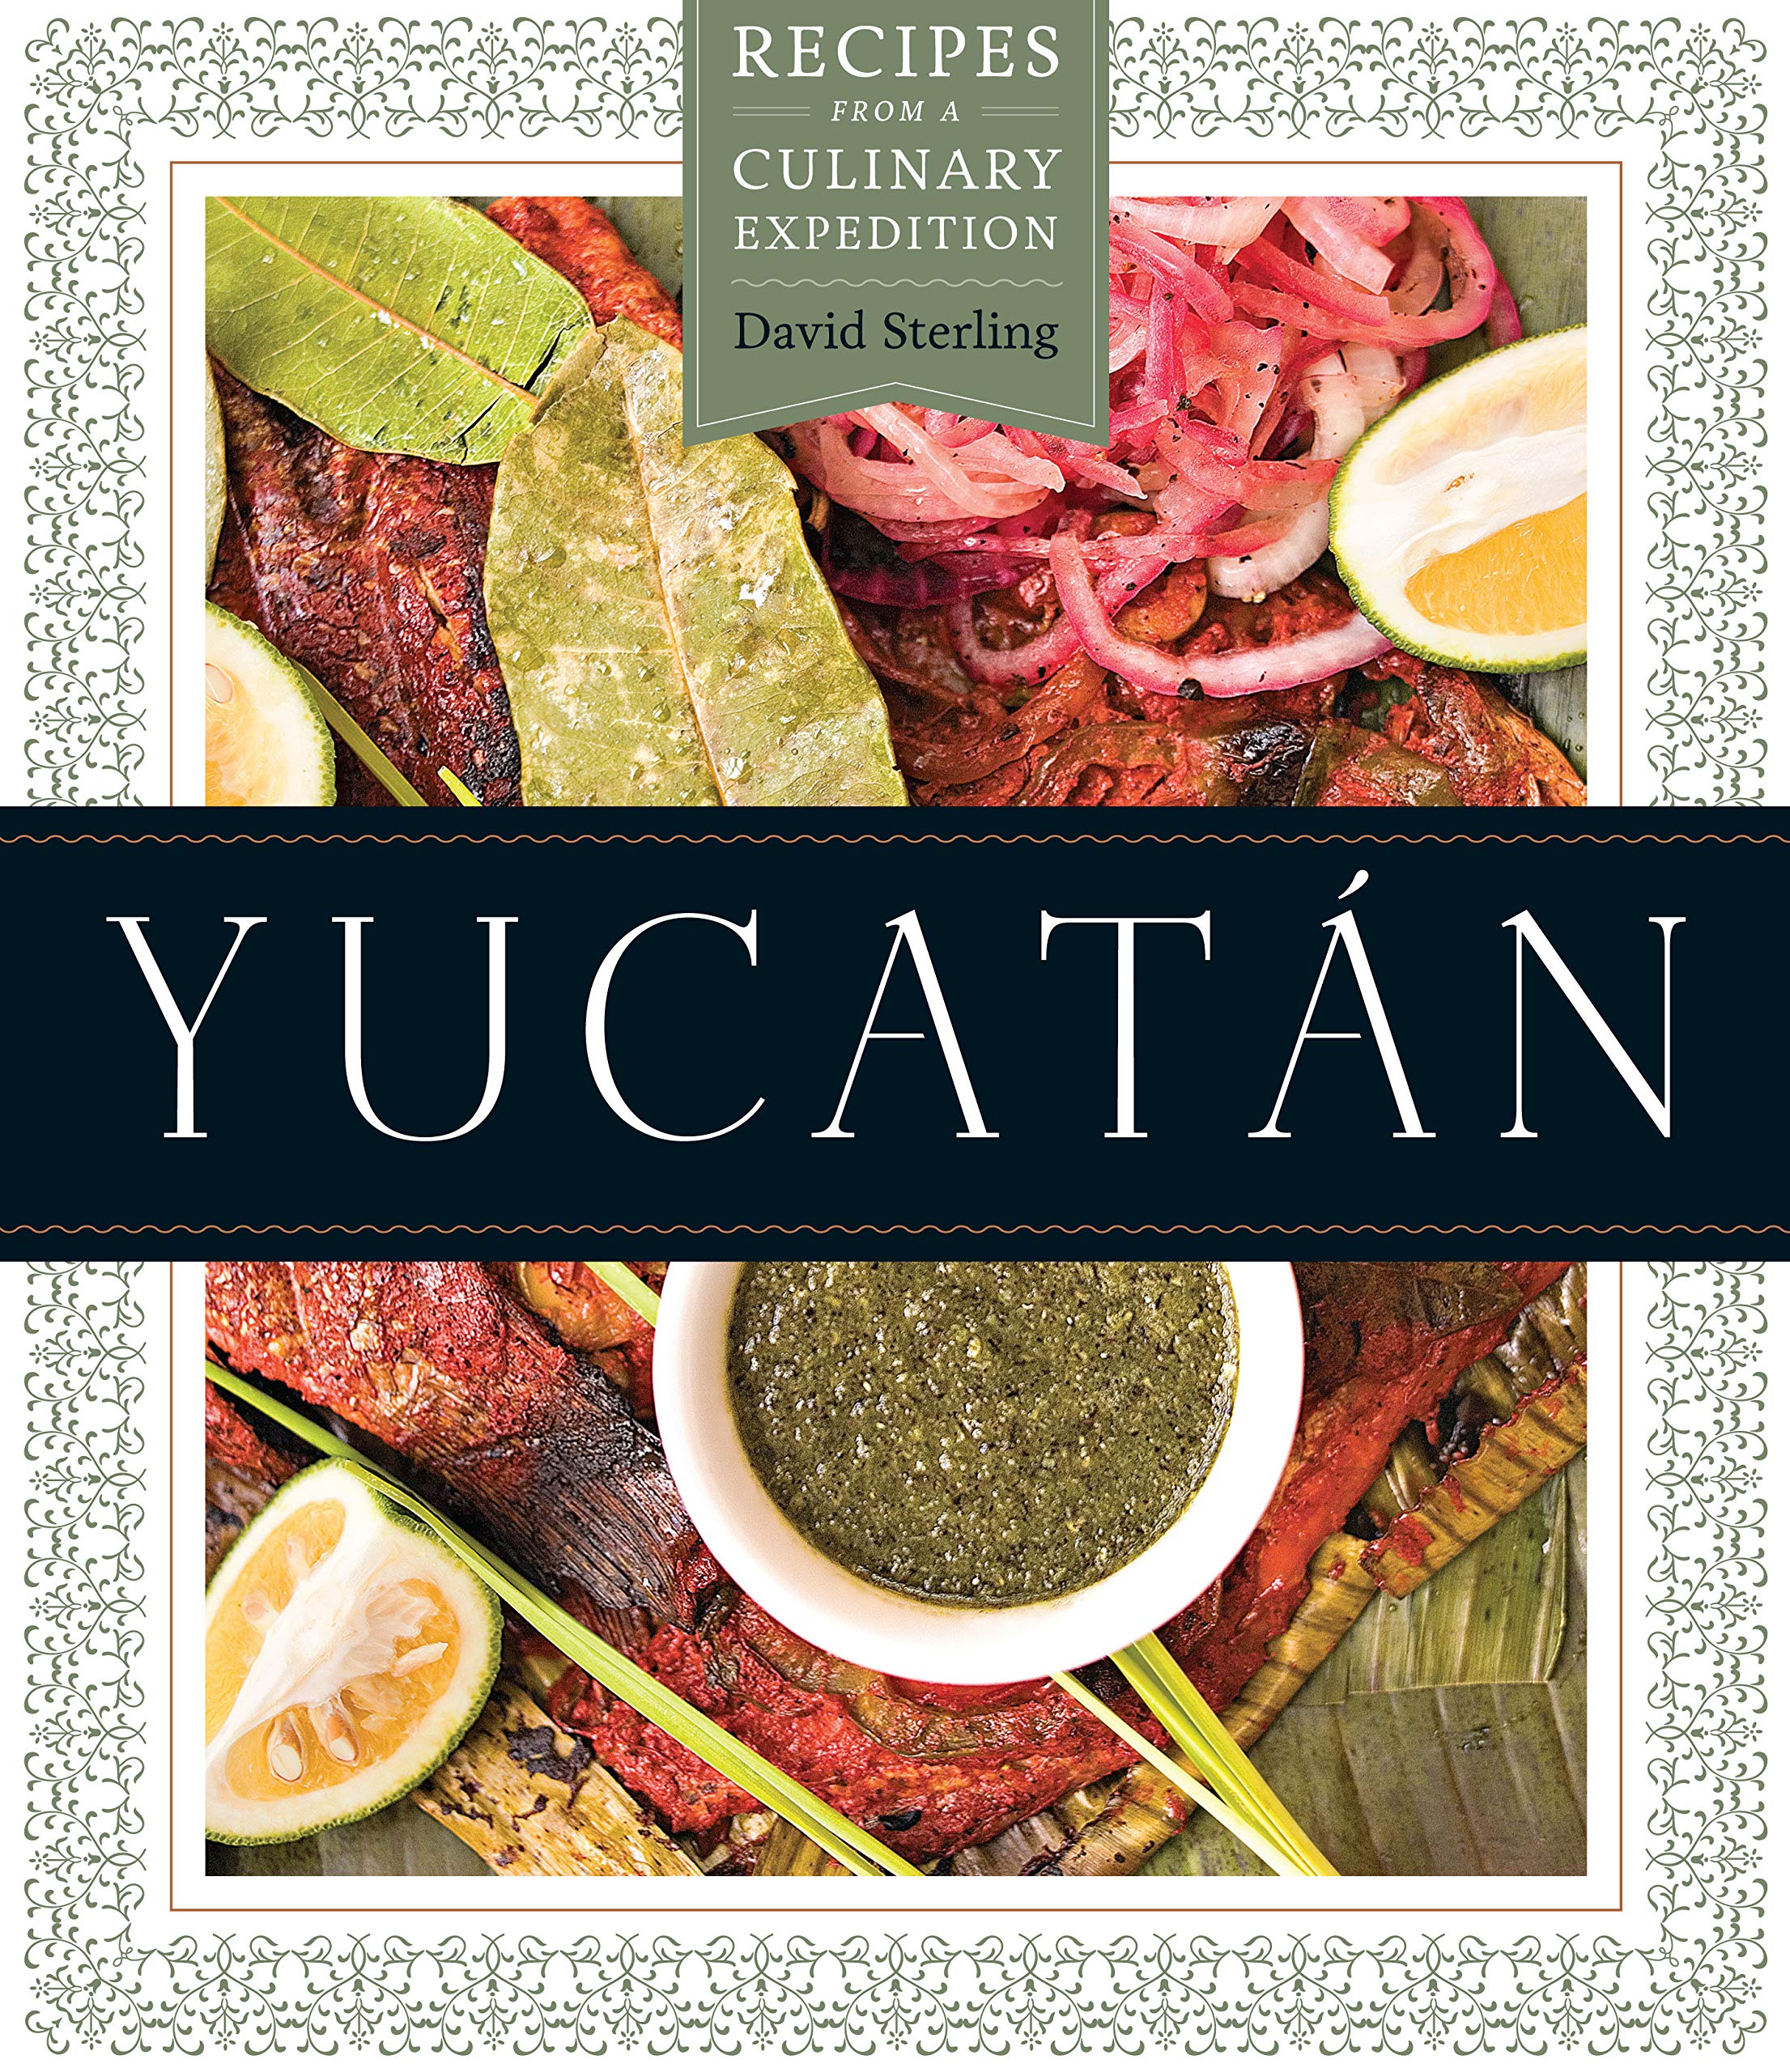 Yucatán: Recipes from a Culinary Expedition (David Sterling)